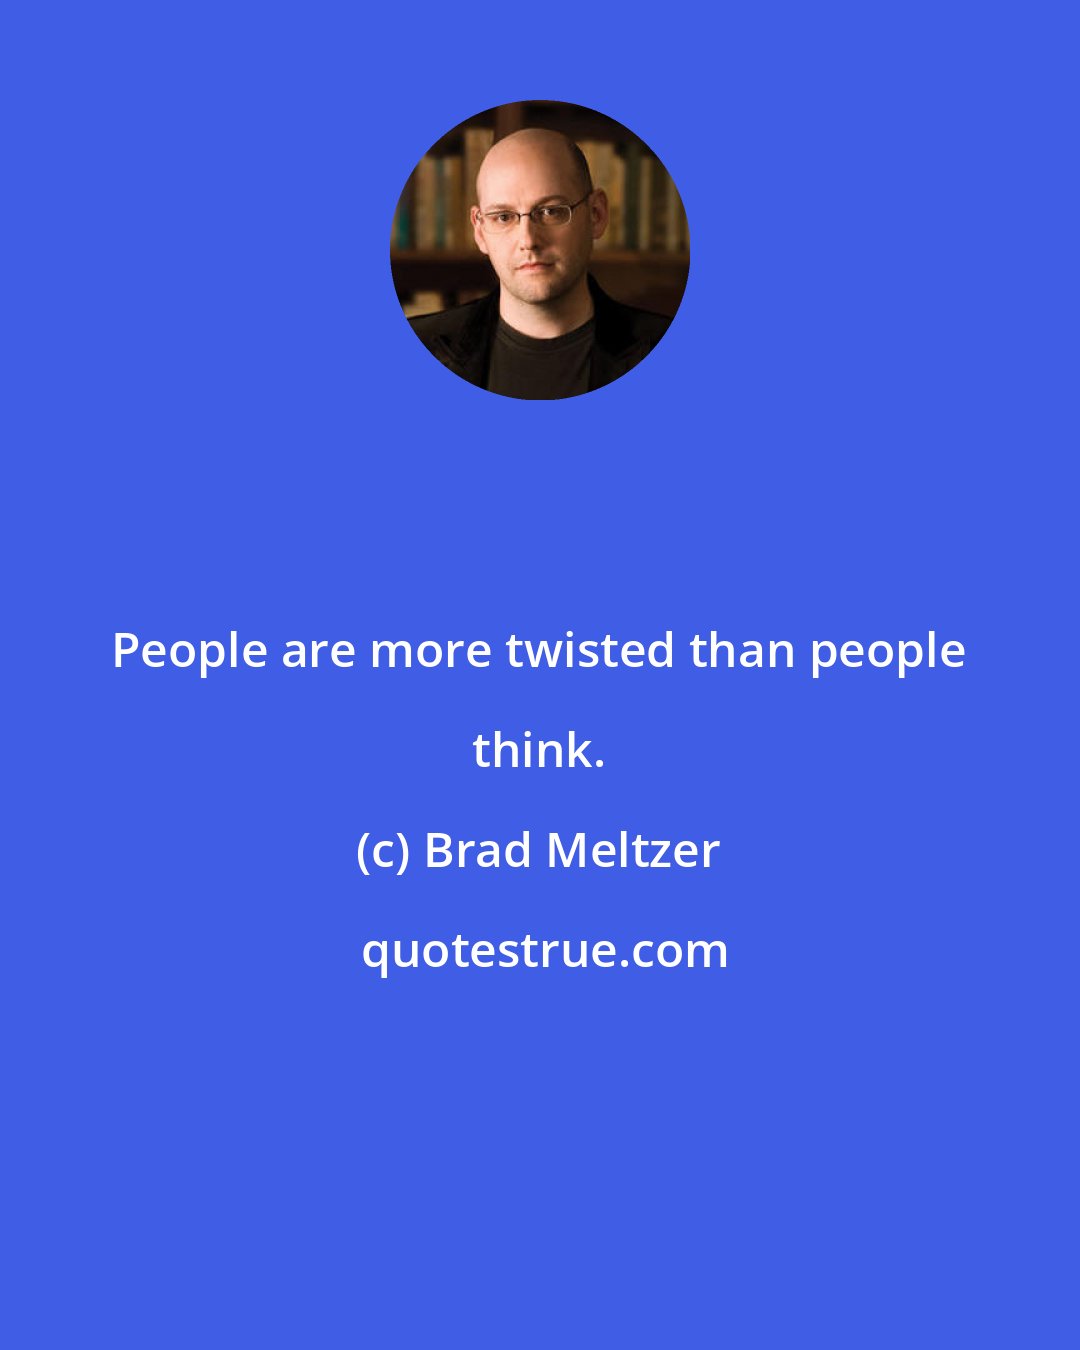 Brad Meltzer: People are more twisted than people think.